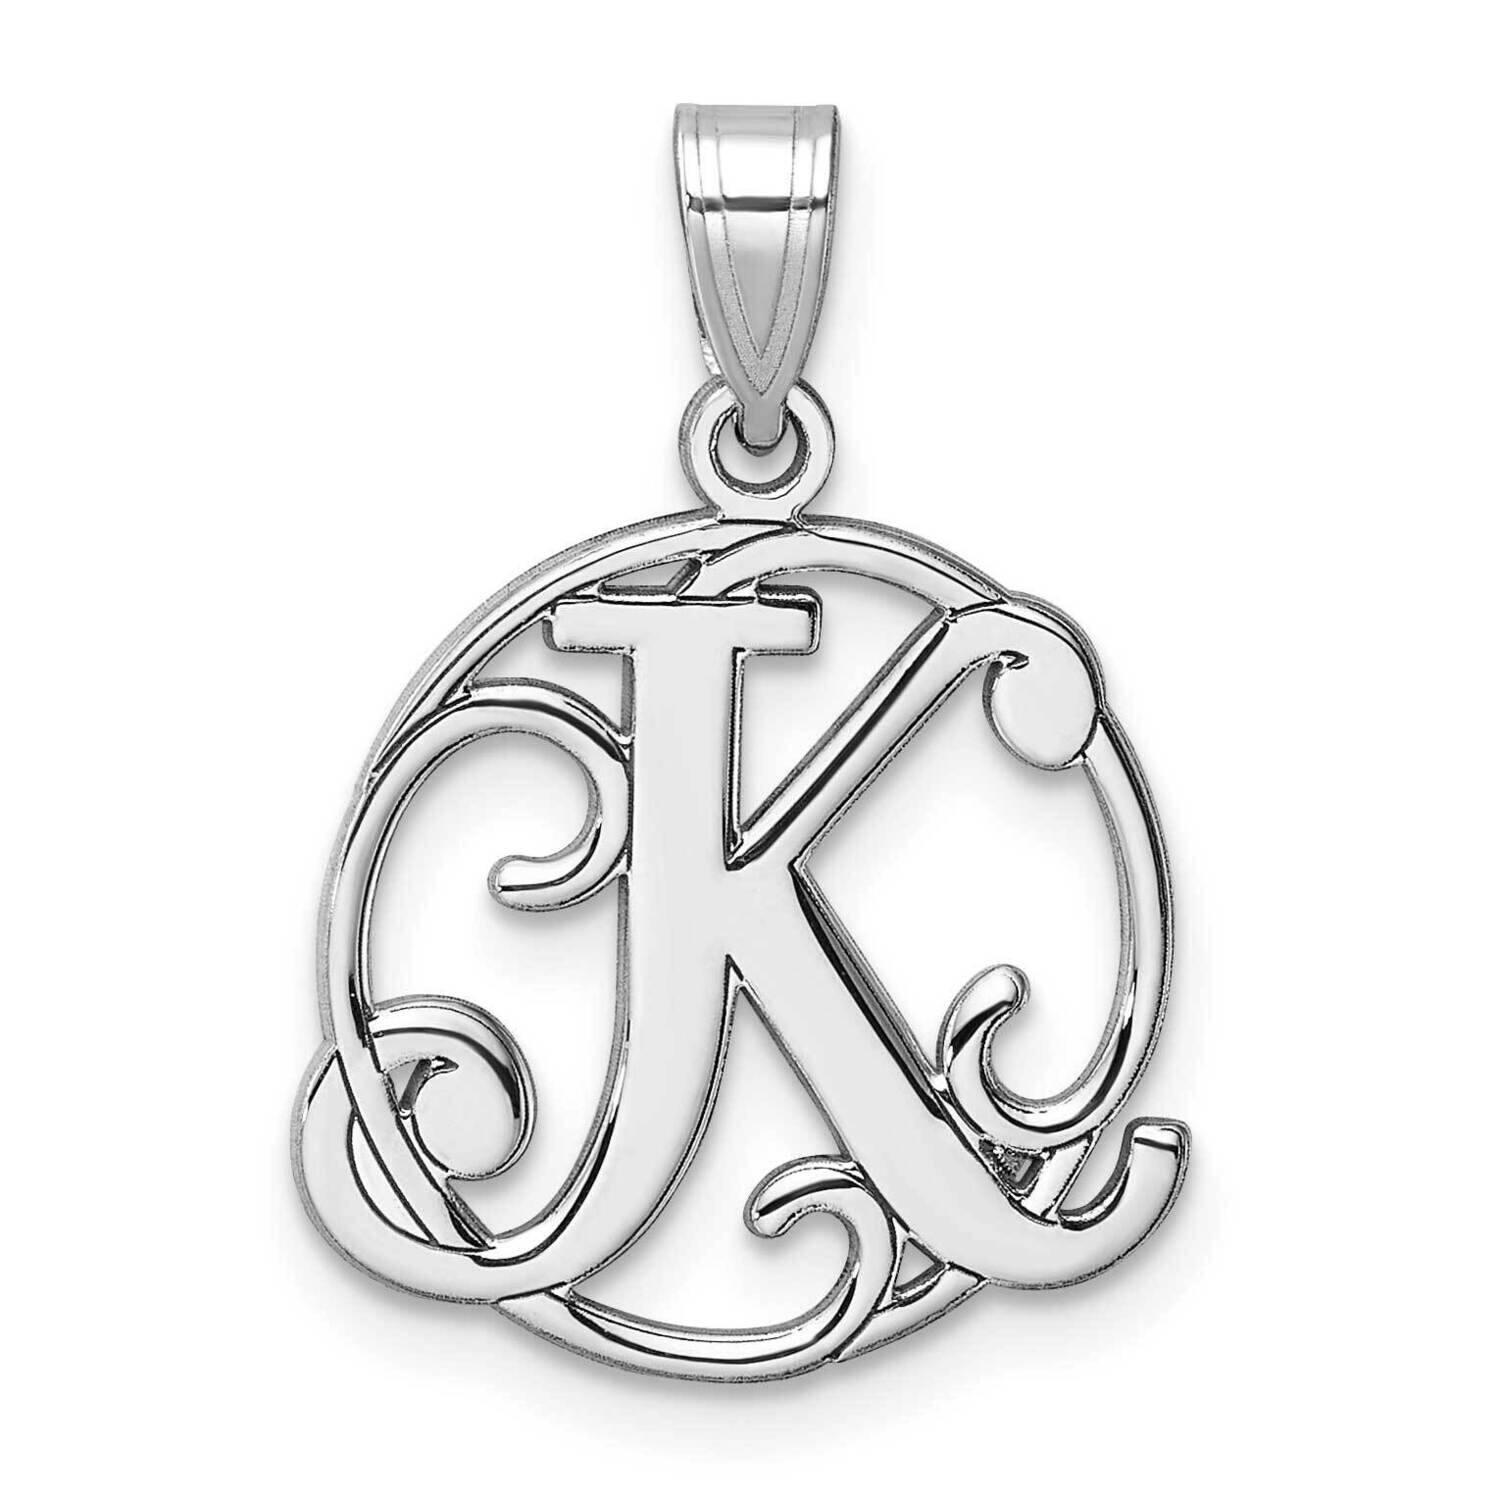 Small Fancy Script Letter K Initial Pendant Sterling Silver Rhodium-Plated QC11257K